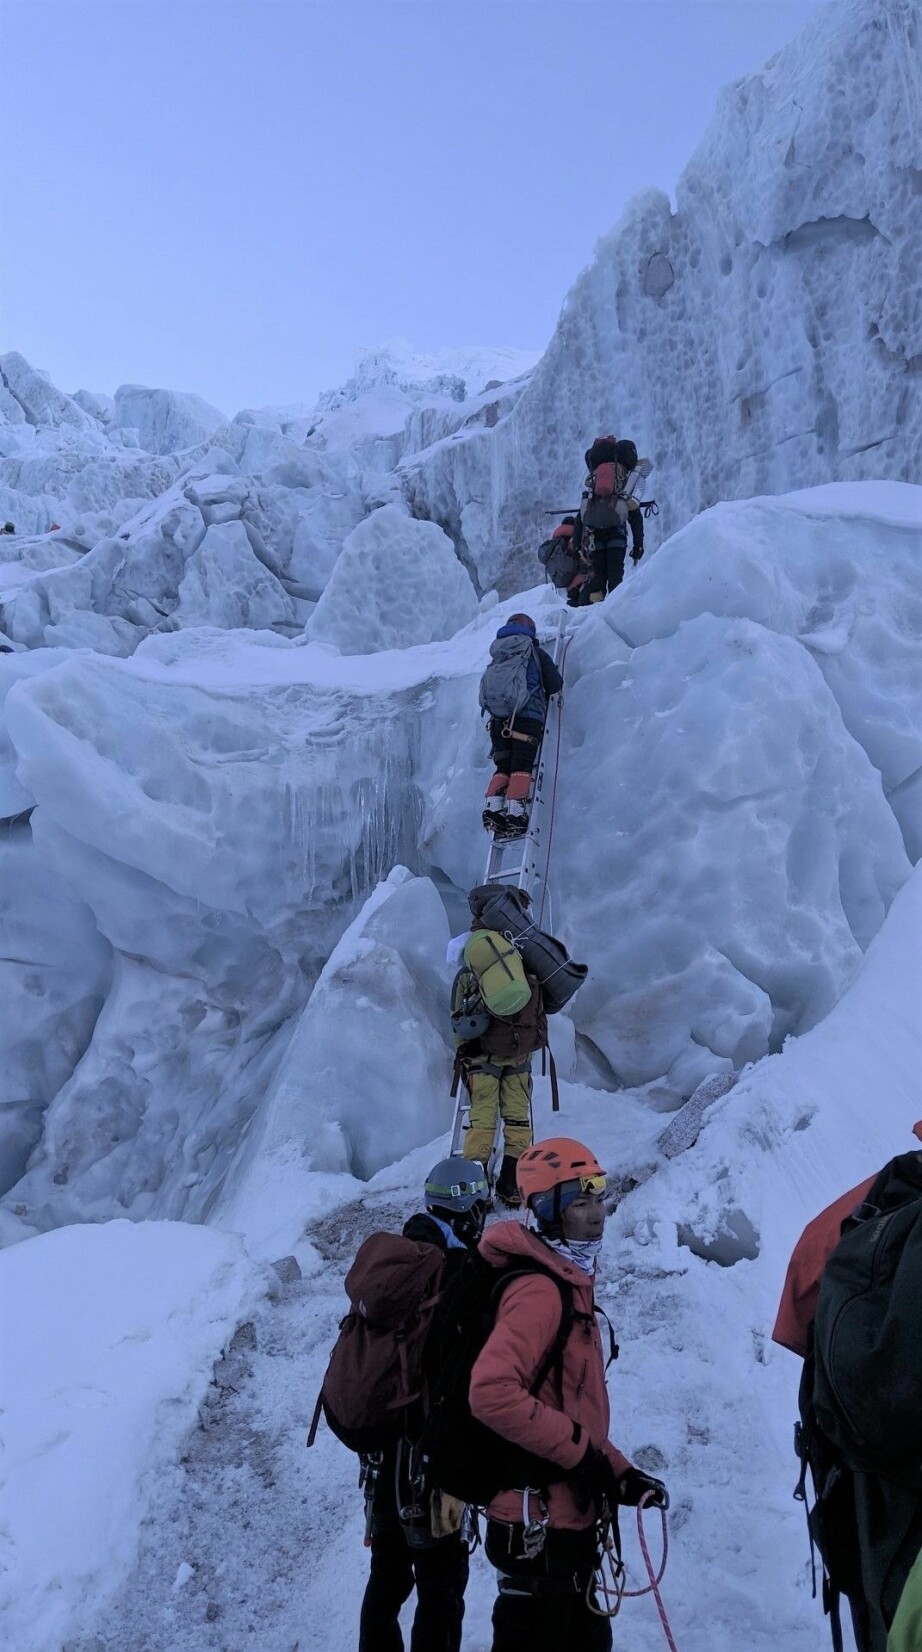 The climbing route through the Khumbu Icefall is compose of fixed ropes and ladders. The icefall is considered one of the most dangerous stages of the Nepal route to Mount Everest's summit.